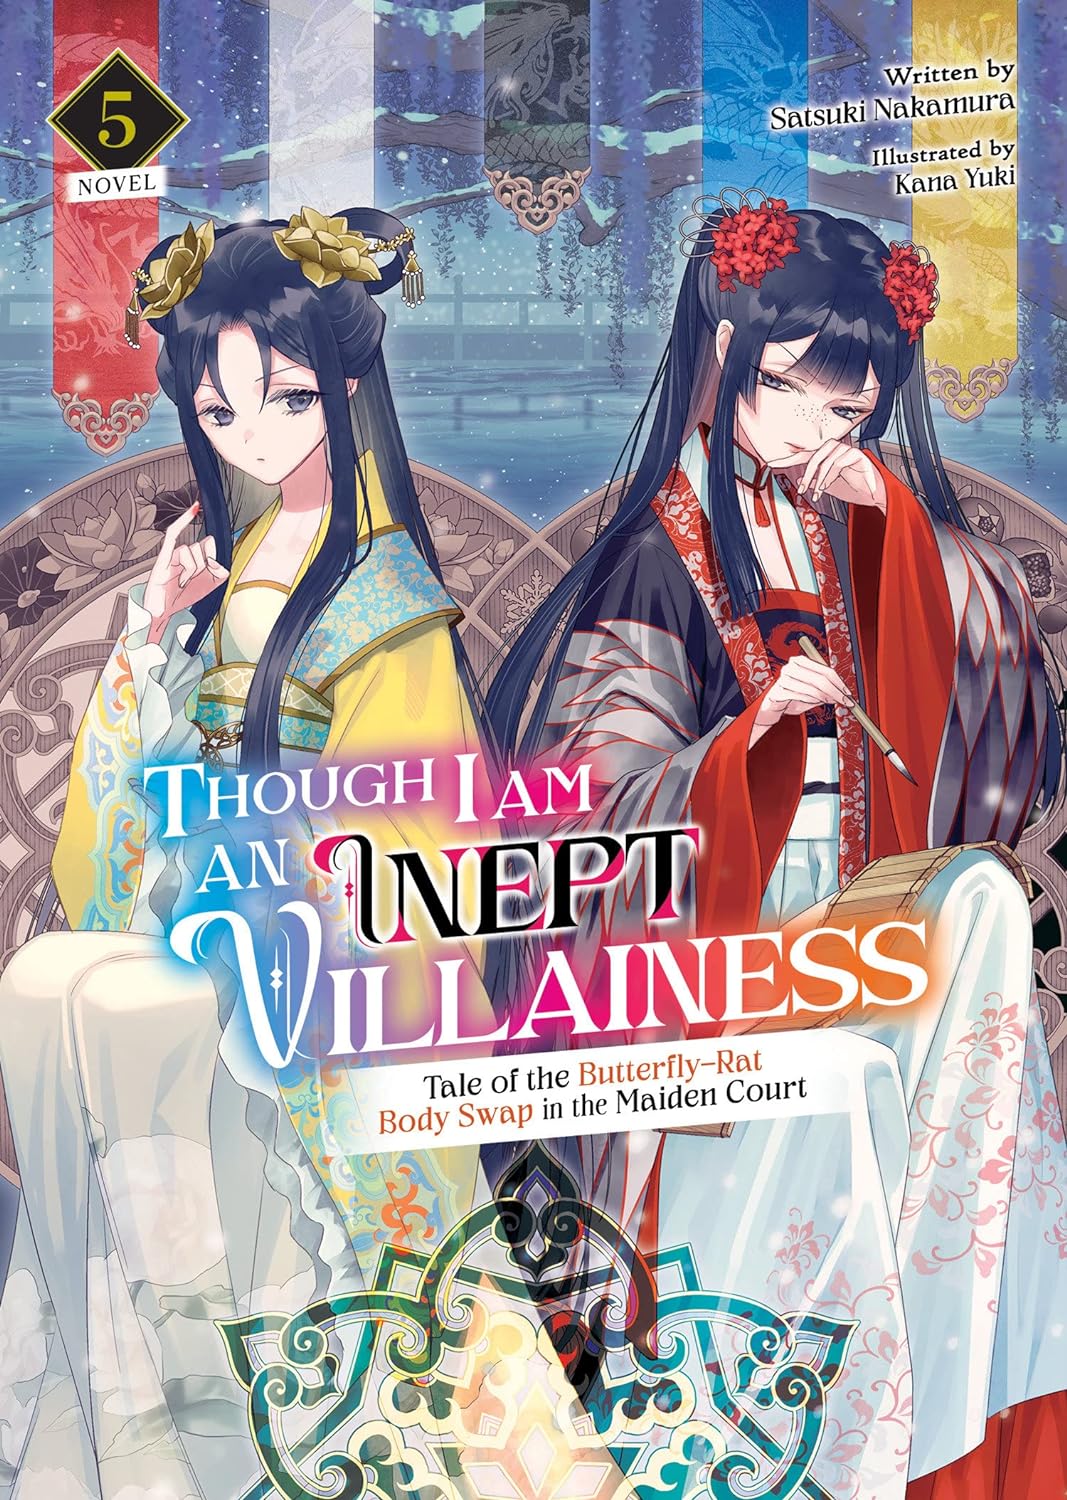 (19/12/2023) Though I Am an Inept Villainess: Tale of the Butterfly-Rat Body Swap in the Maiden Court (Light Novel) Vol. 05